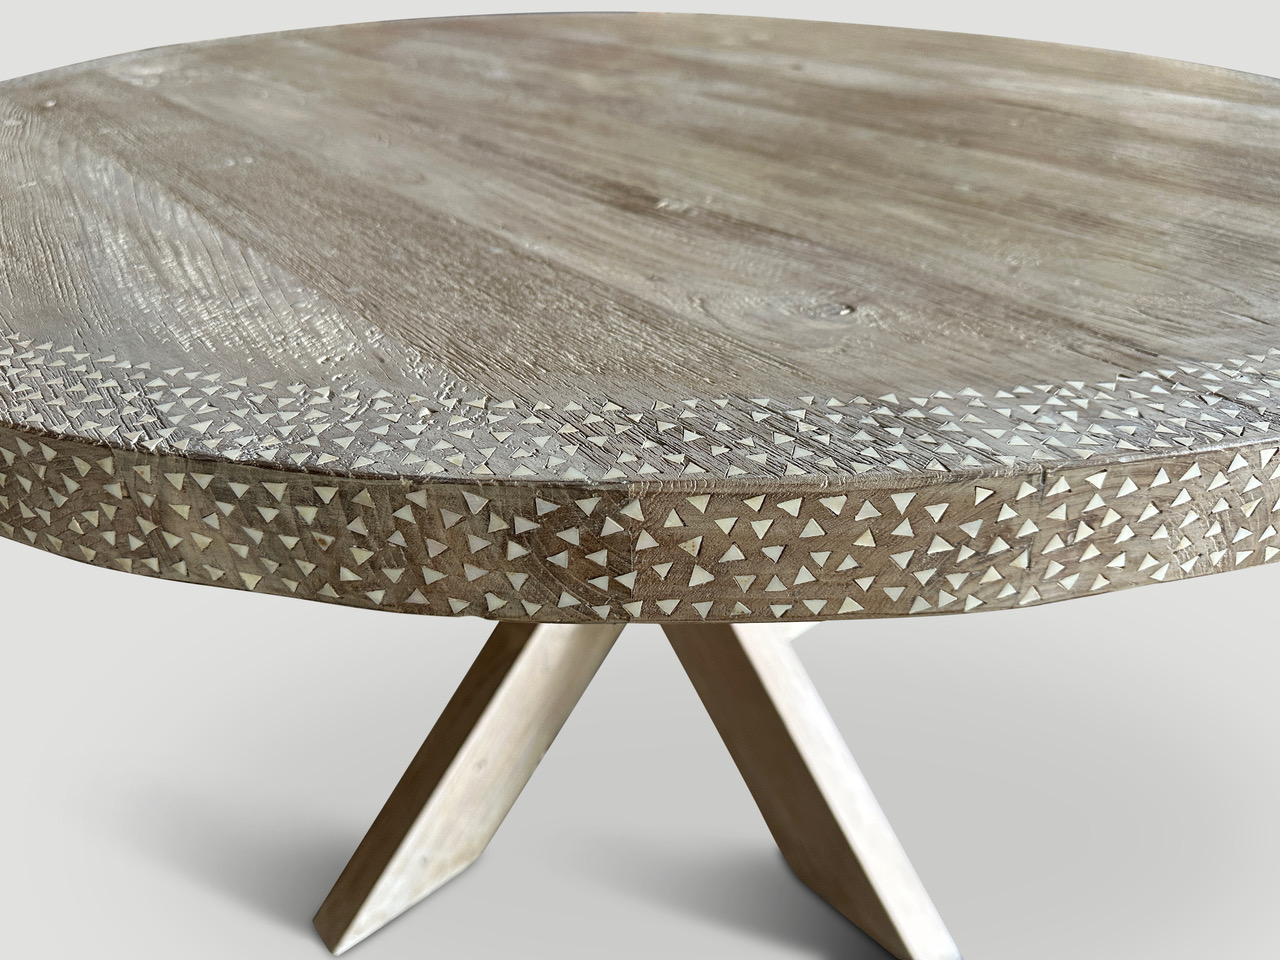 round shell inlaid teak wood dining table